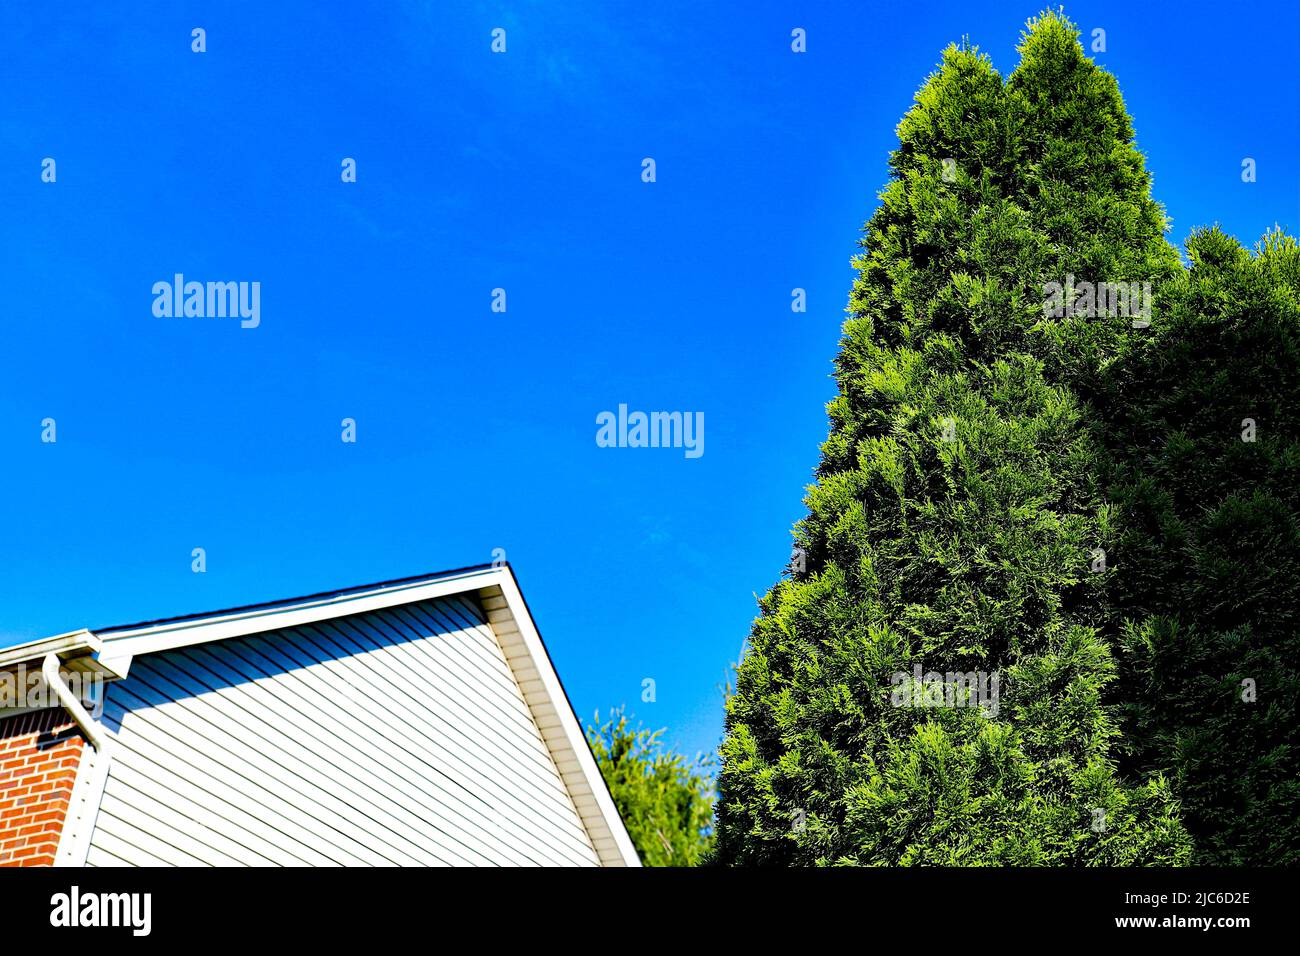 Tall green shrubbery against a blue sky Stock Photo